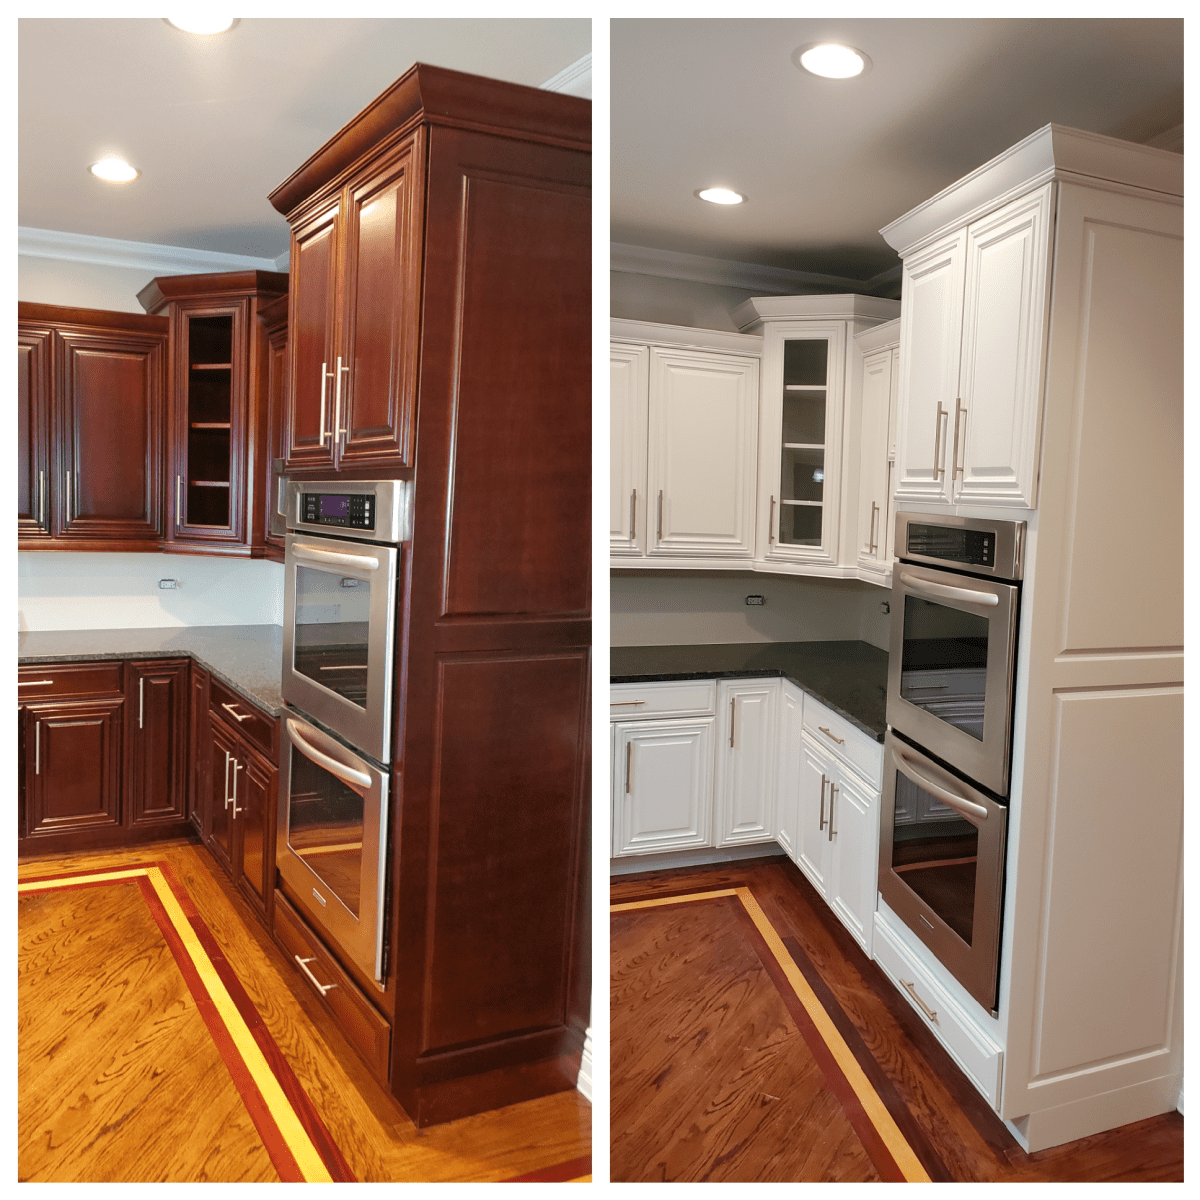 Tips For Painting Cherry Cabinets White, Can Wood Cabinets Be Painted White